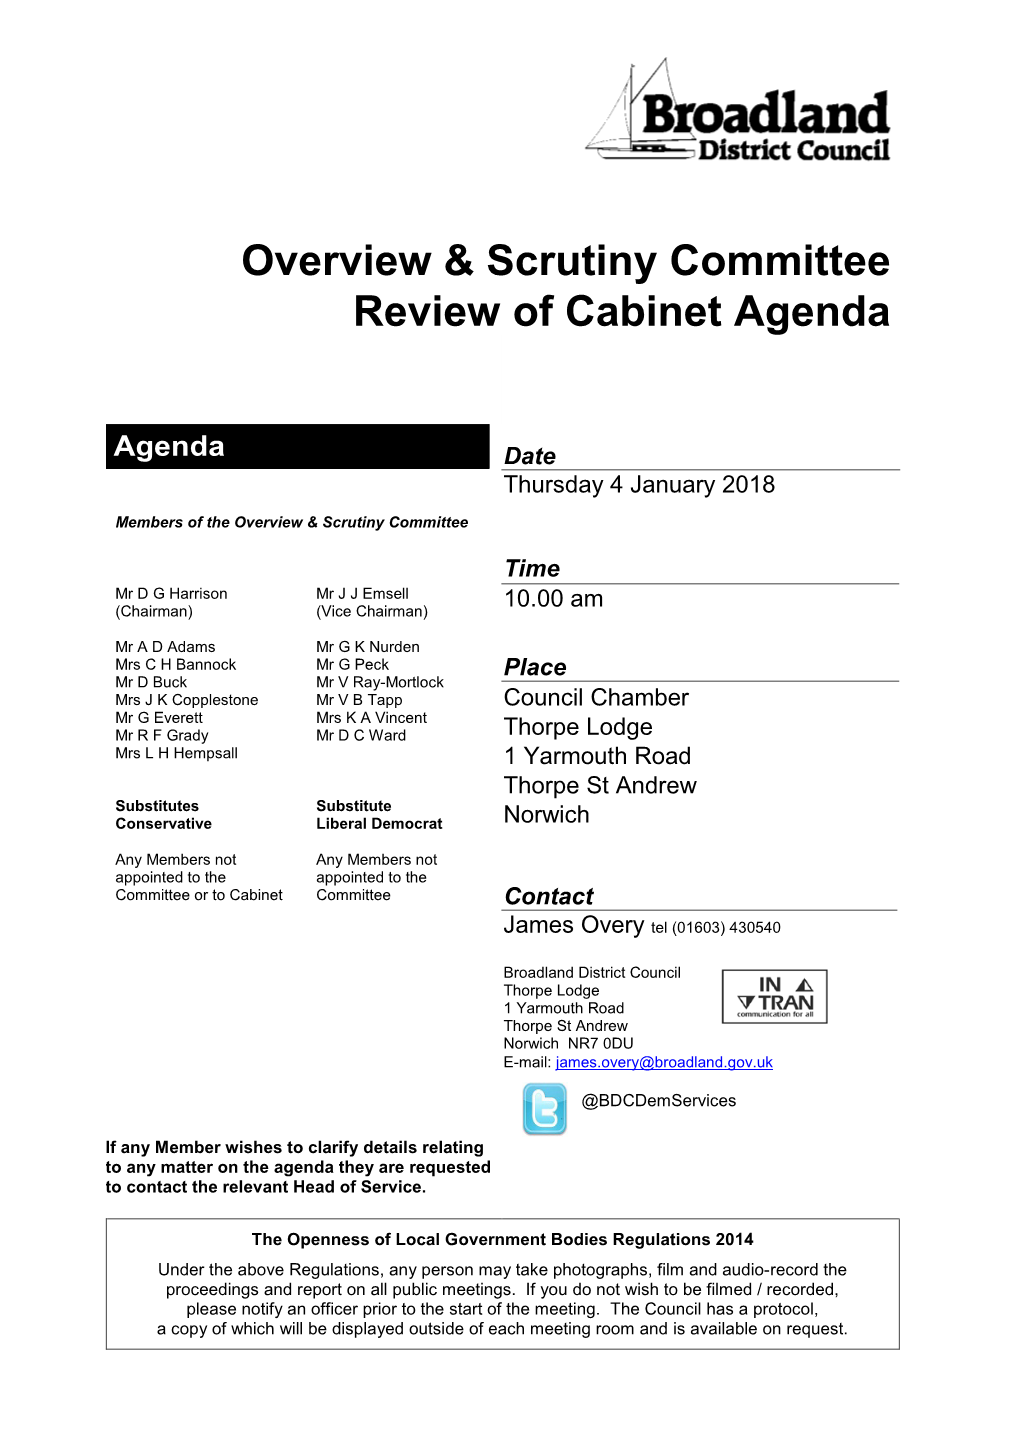 Overview and Scrutiny Committee Papers